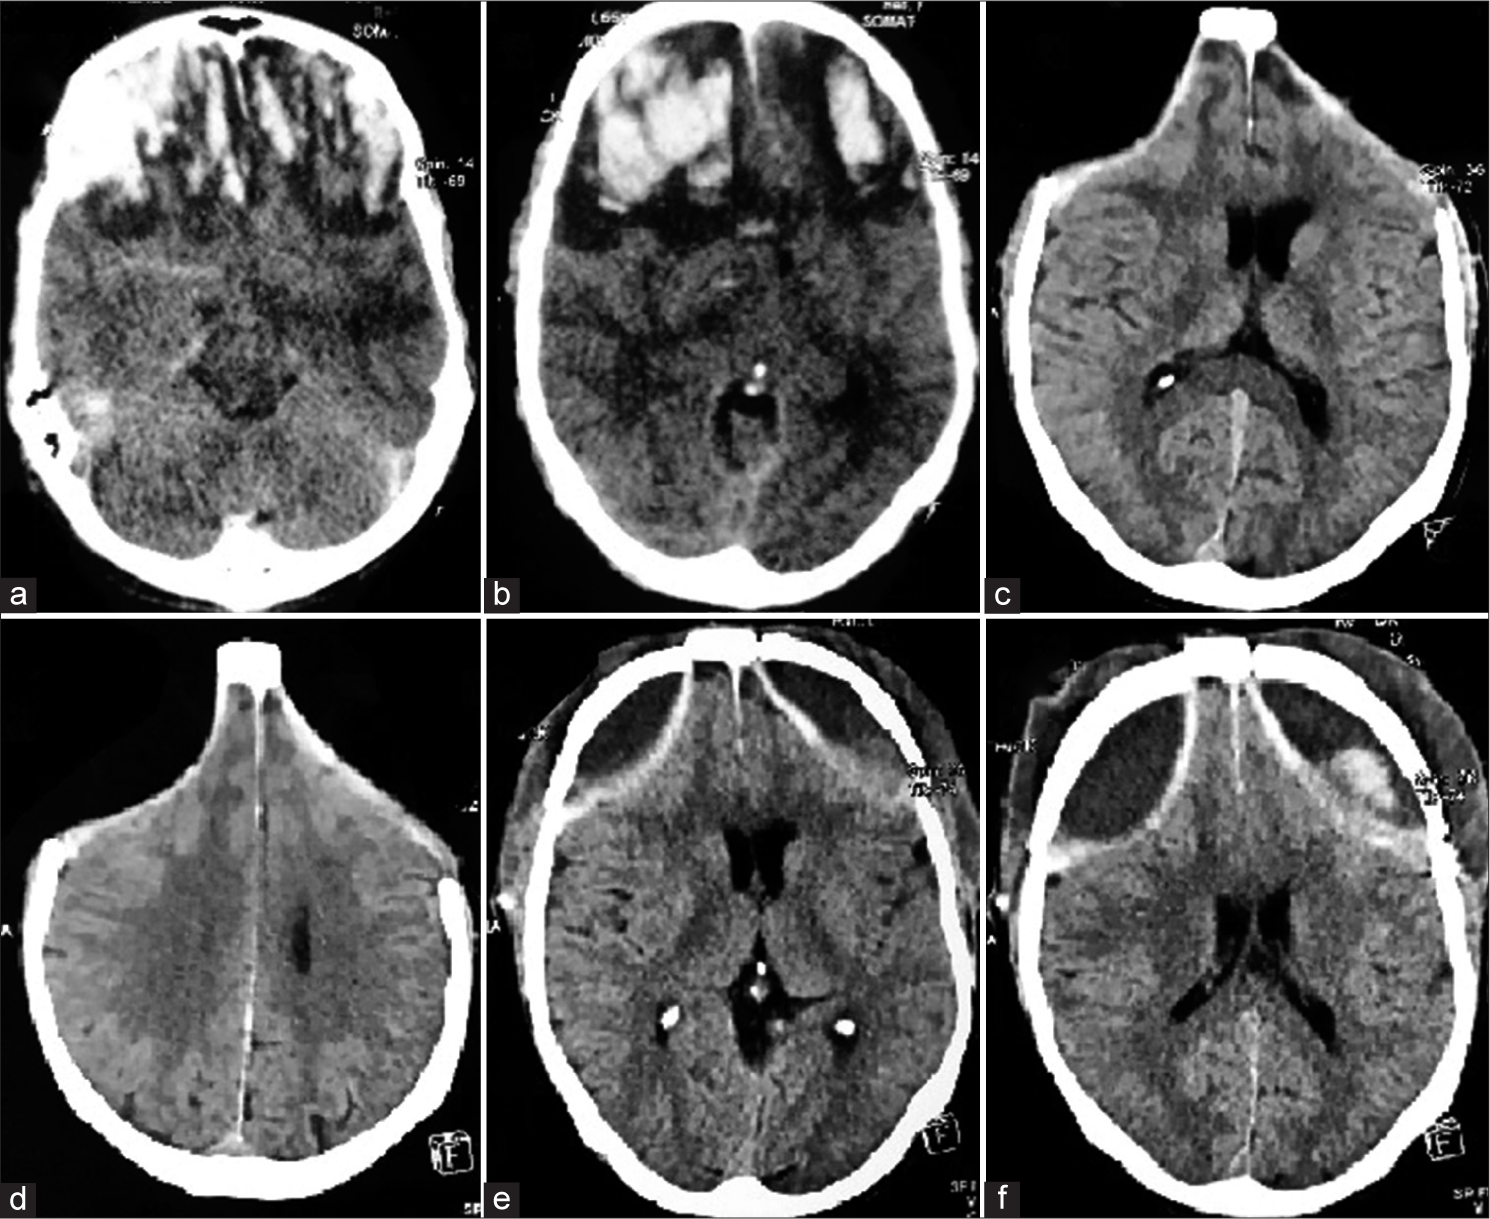 (a and b) Axial computed tomography (CT) scan images of a patient with bifrontal contusions showing effaced cisterns and ventricles with significant perilesional edema, who subsequently underwent bilateral decompressive craniectomy. (c and d) Axial CT images show that precranioplasty the scalp flap was sunken bilaterally. In this patient, no neodural hitch sutures had been placed, and (e and f) axial CT images done on the morning after surgery show a significant post-operative collection below the replaced flap on both sides.